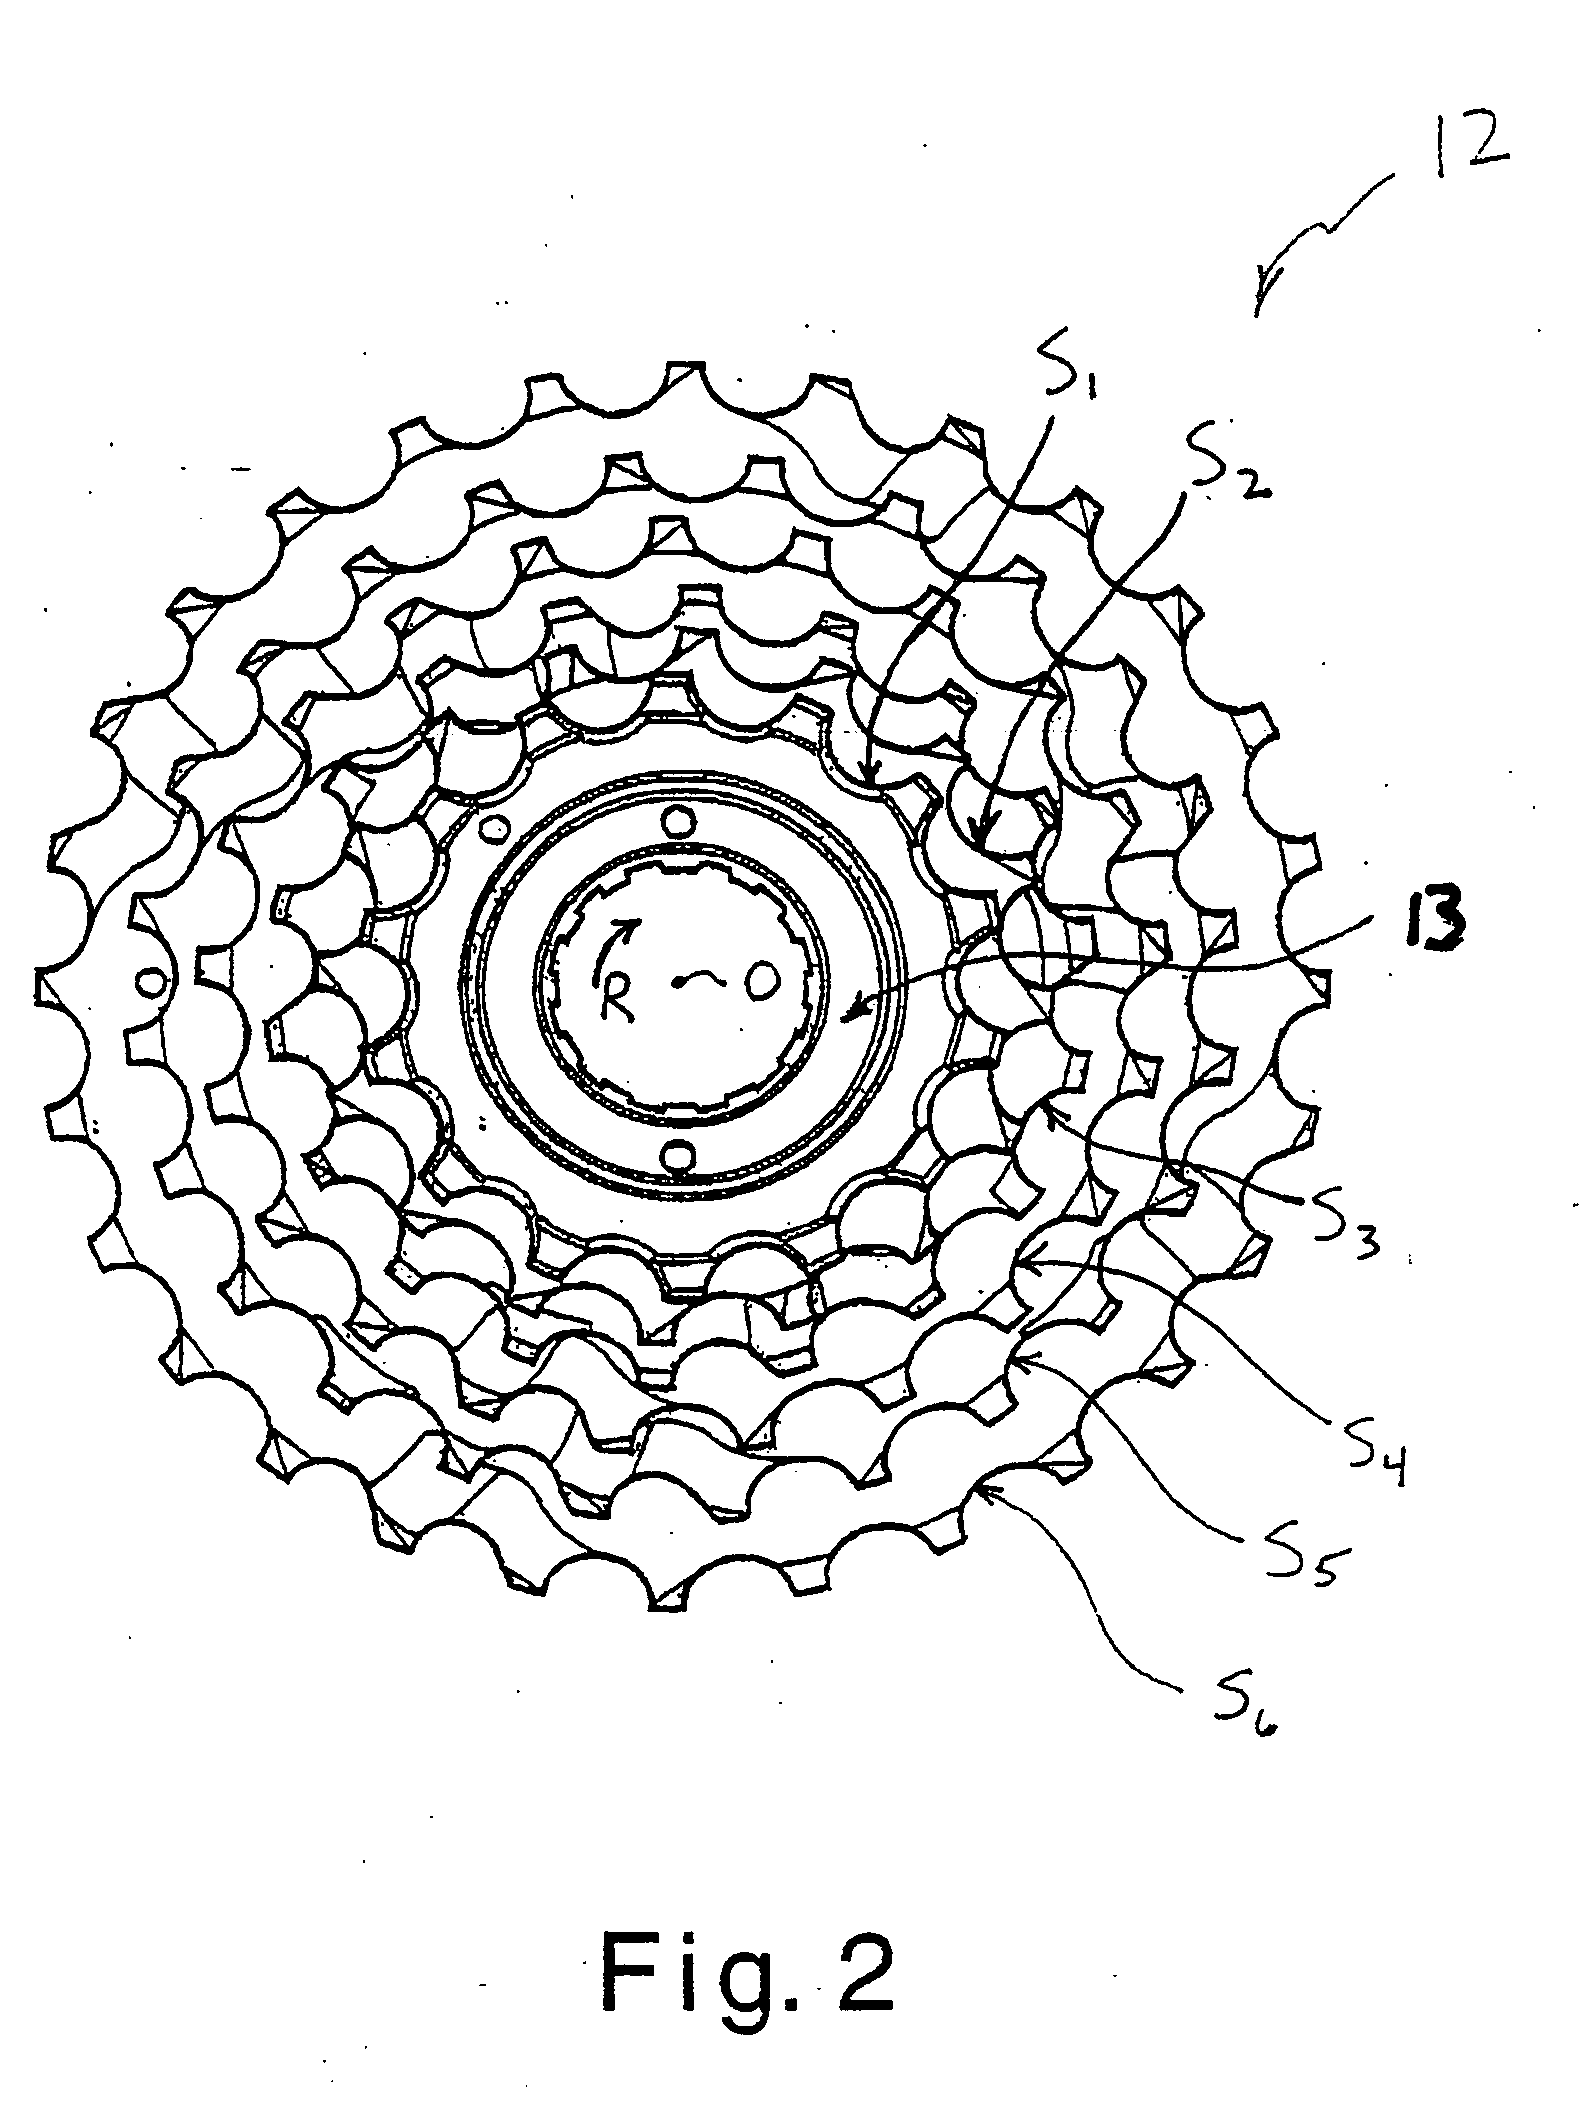 Top sprocket for a rear sprocket assembly and rear sprocket assembly for a bicycle